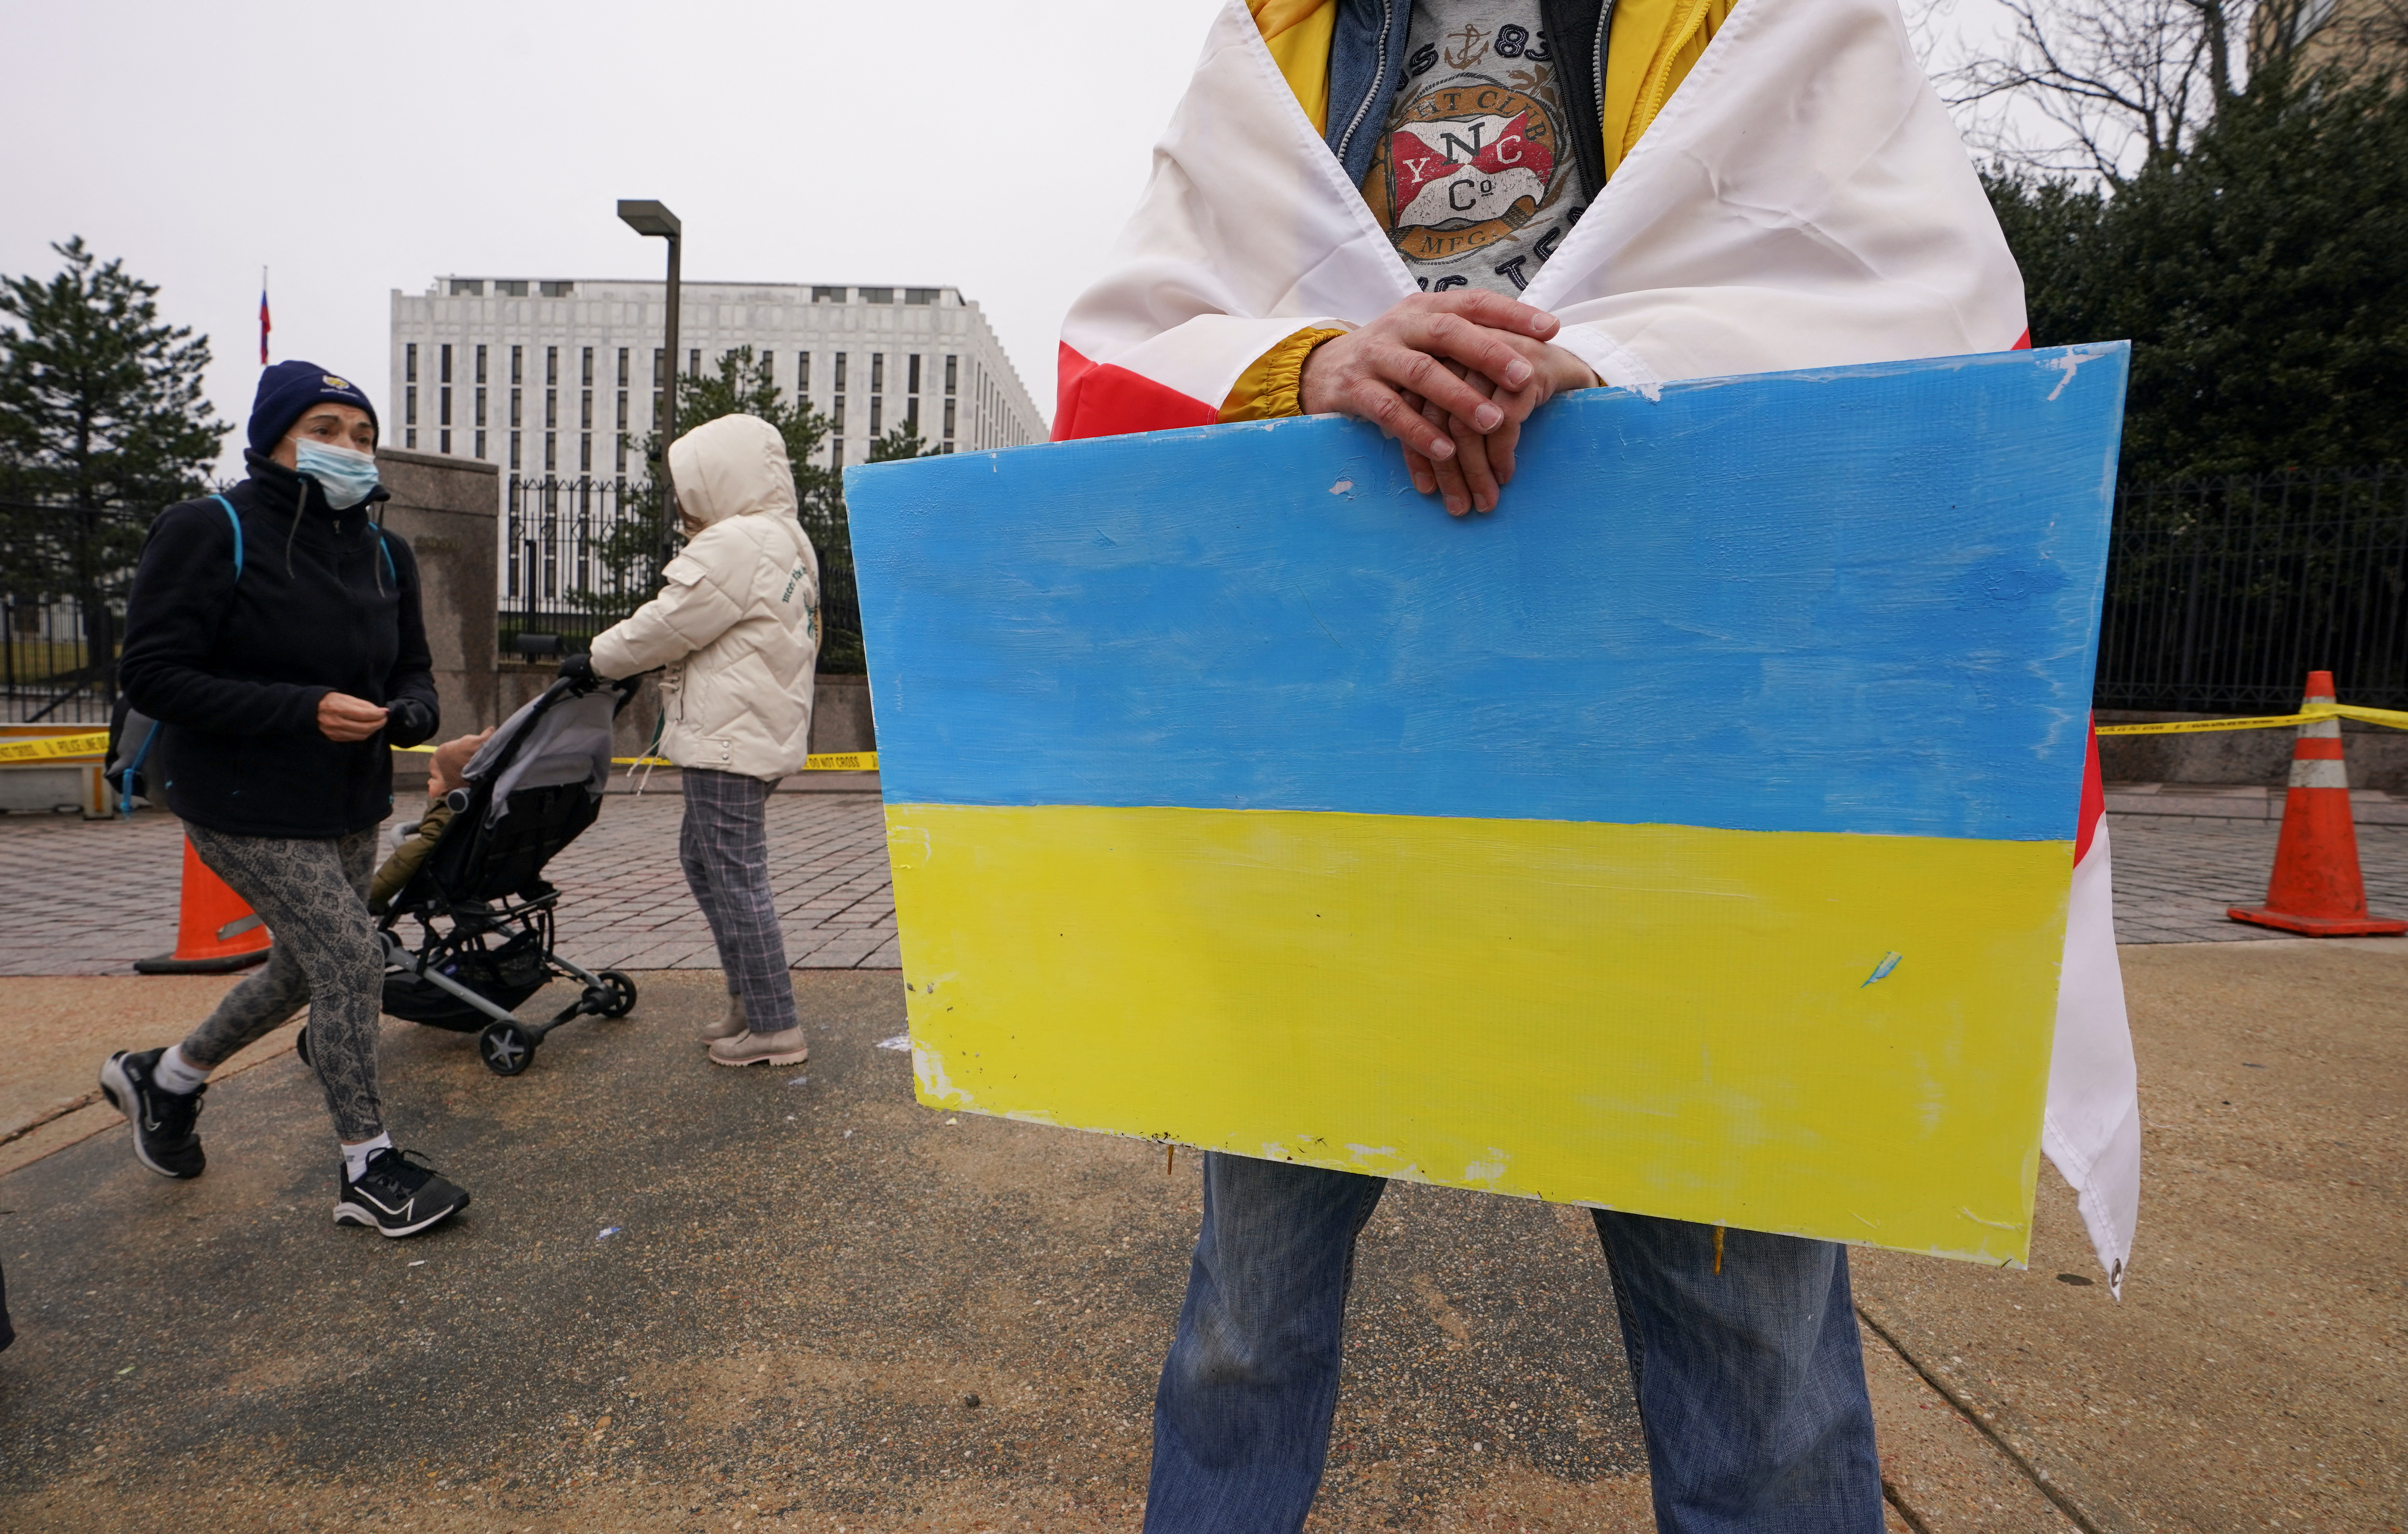 A man holds a Ukraine flag to protest against Russia's invasion of Ukraine in front of the Russian Embassy in Washington, U.S., February 25, 2022 REUTERS/Kevin Lamarque